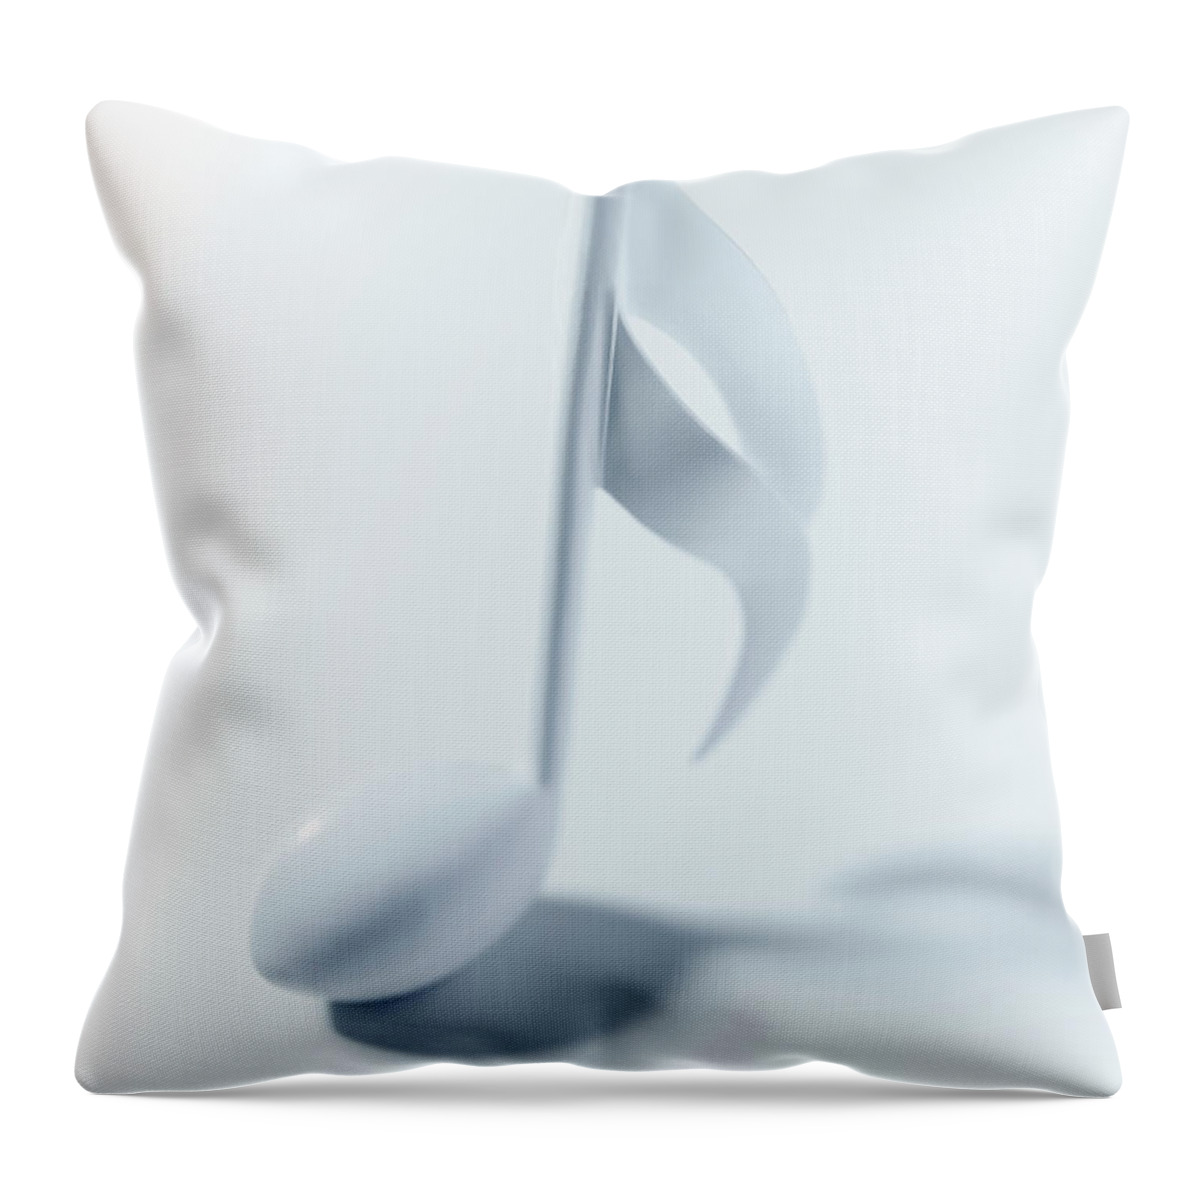 Vertical Throw Pillow featuring the photograph Close Up Of Semiquaver Musical Note On by Adam Gault